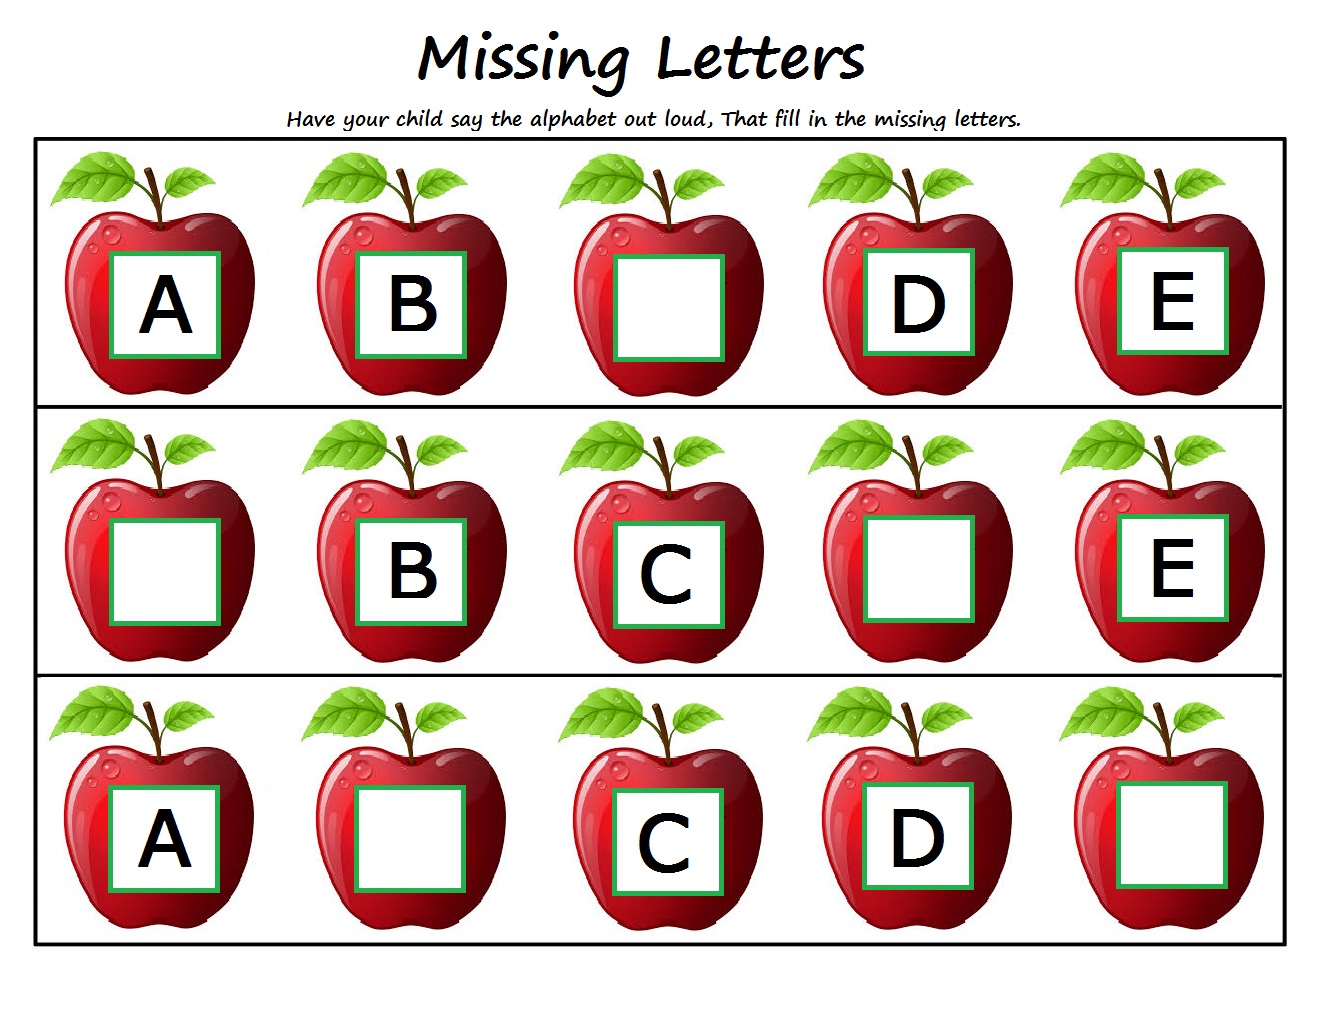 Kindergarten Worksheets: Kindergarten Worksheets - Missing Letters